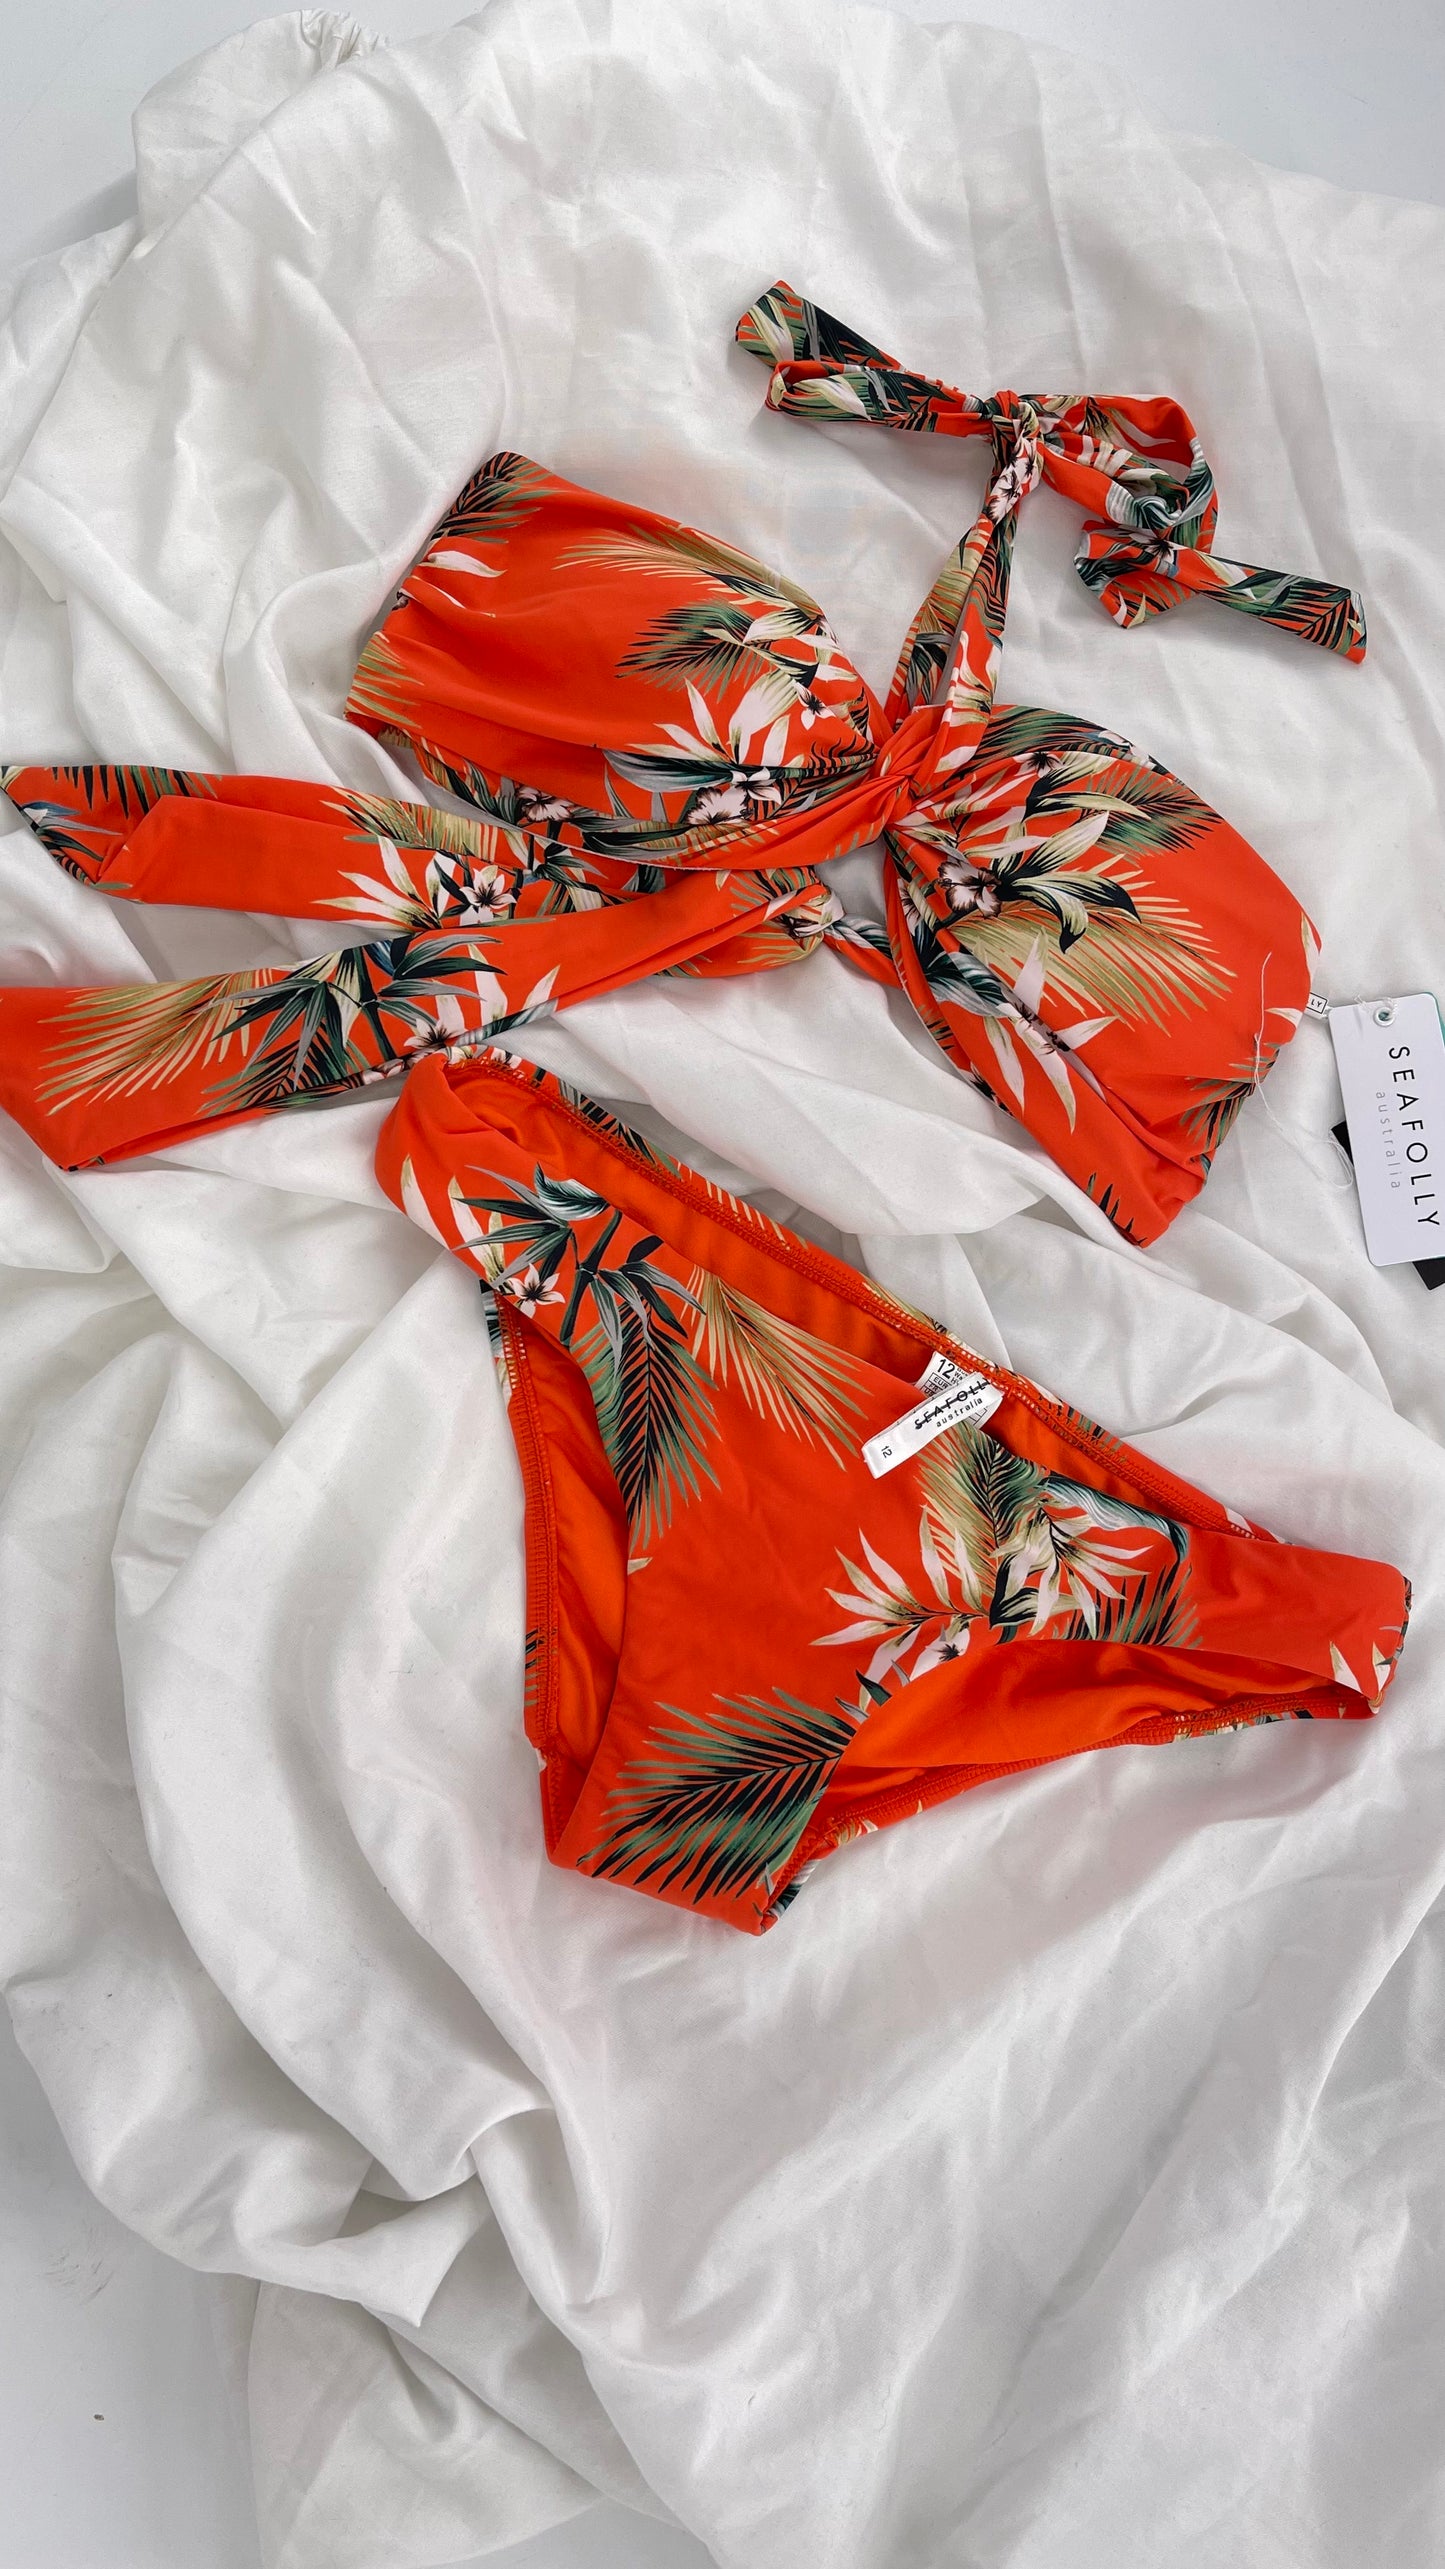 Anthropologie Sea Folly Orange Tropical Swim Set with Tags Attached (10 Top 12 Bottoms)